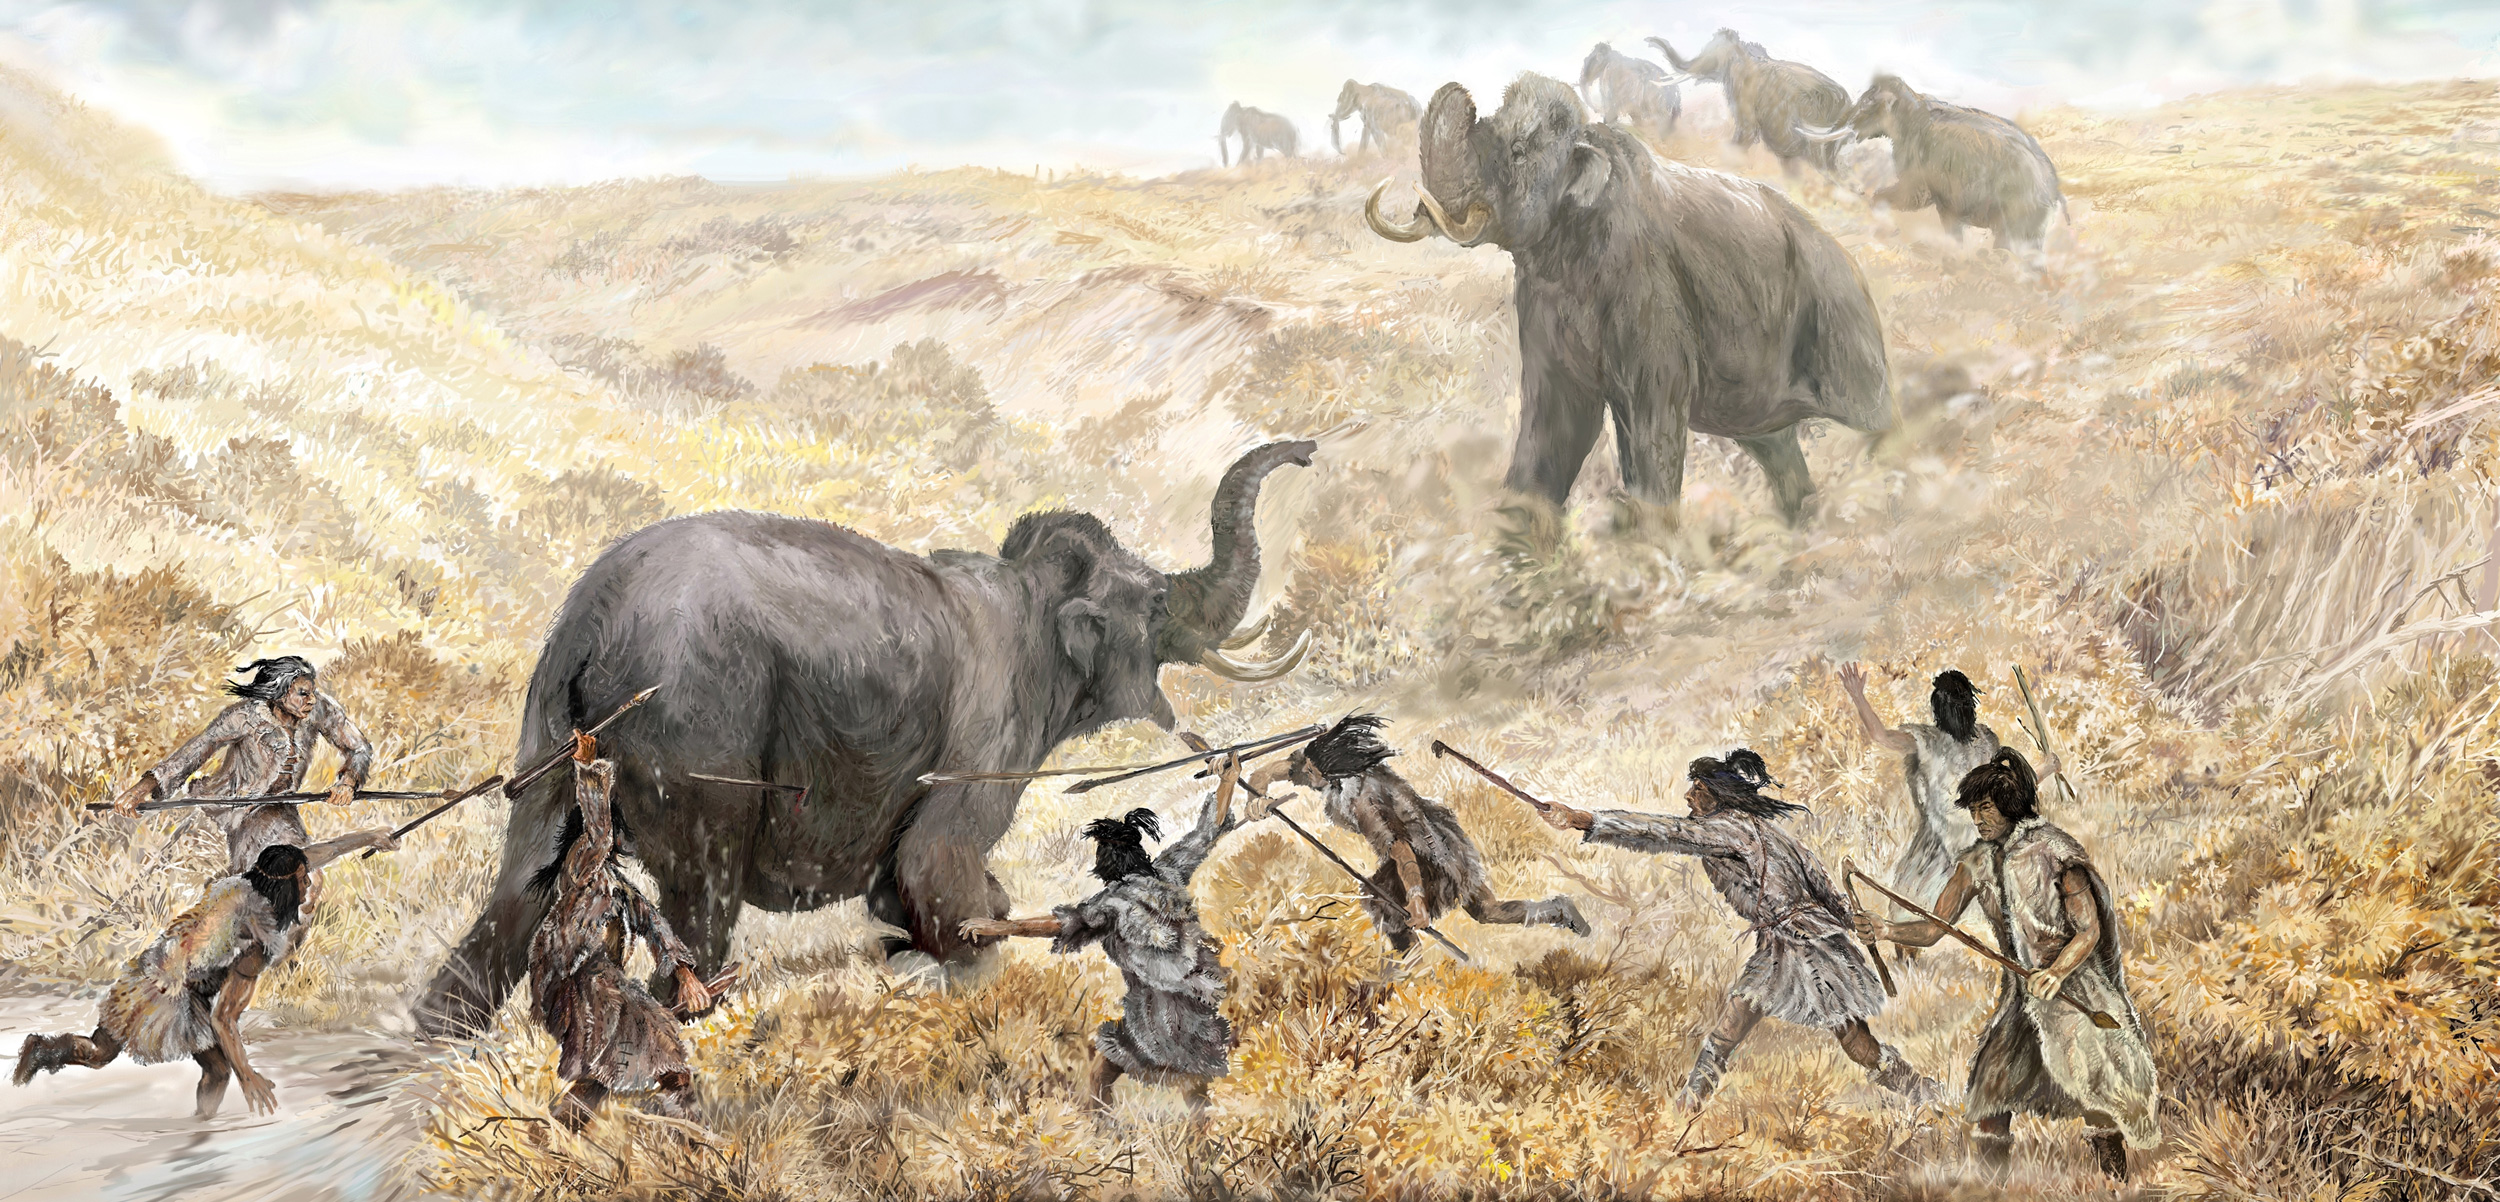 Clovis hunters cut off the escape of a wooly mammoth near the end of the last ice age. For decades, archaeologists thought that Asian migrants first reached the Americas around 13,000 years ago, and swiftly migrated southward to what is now the United States. Their descendants, the Clovis people, were said to be the first Americans. Illustration by Field Museum Library/Getty Images